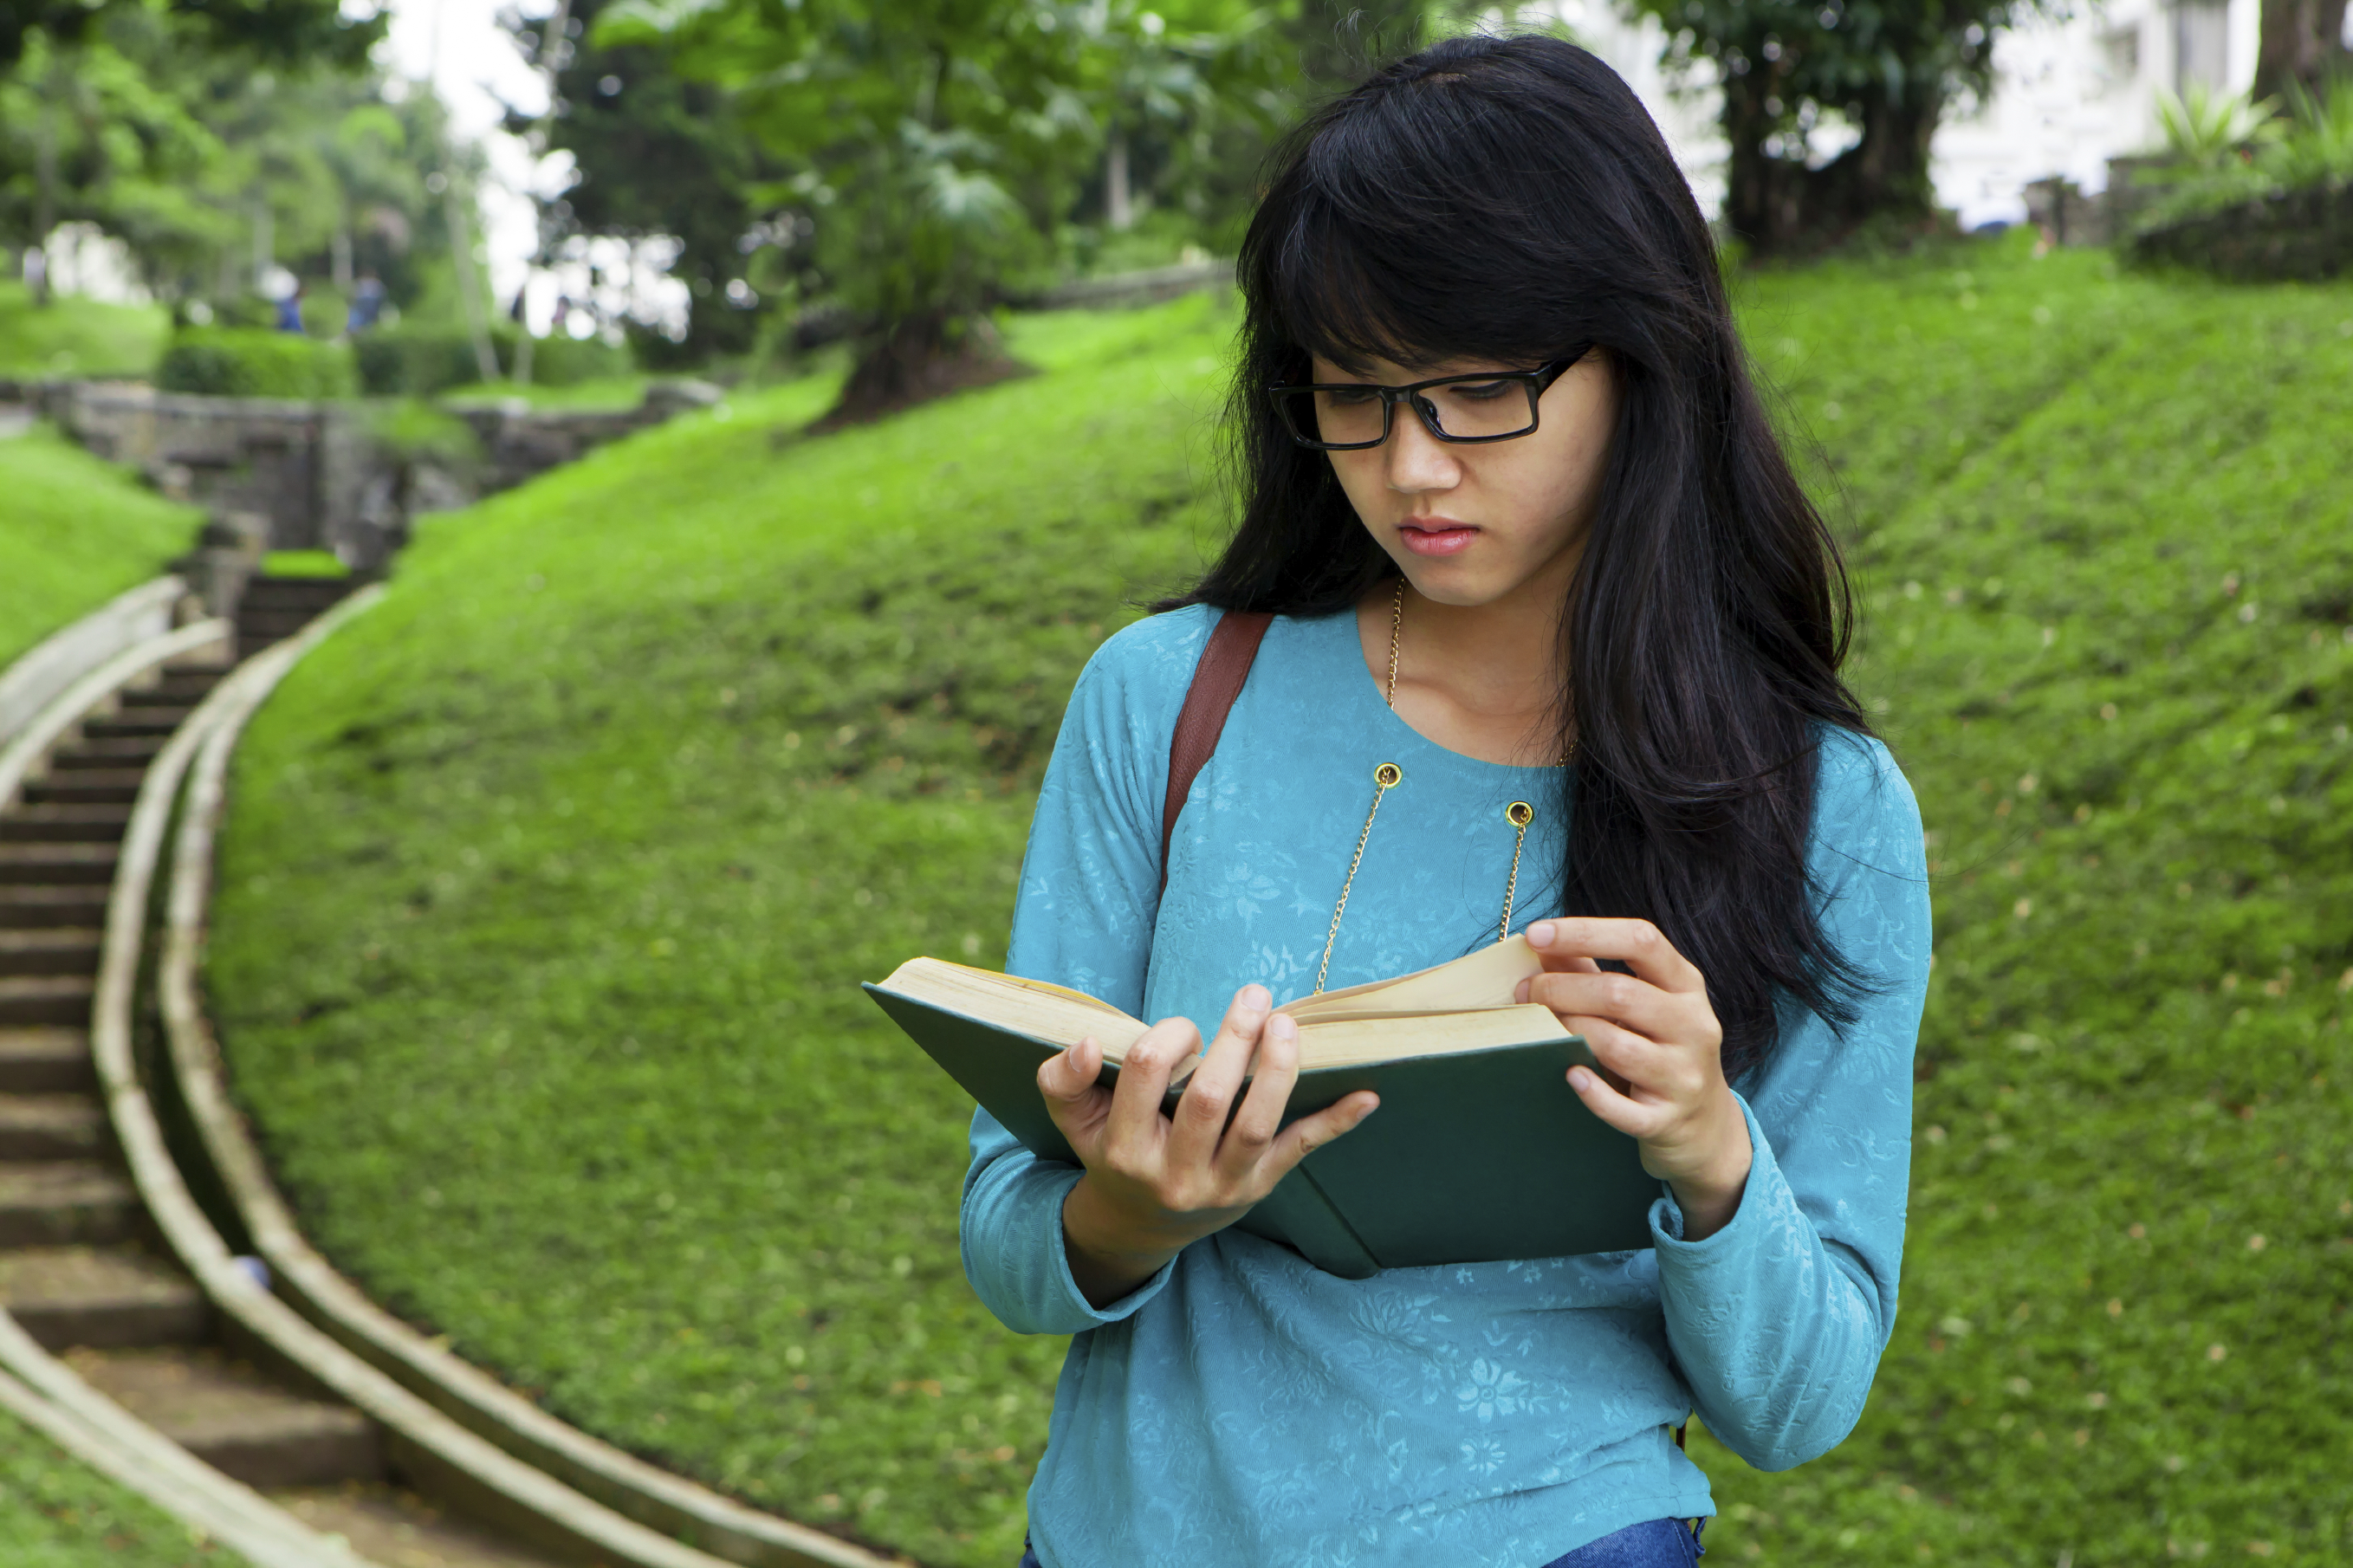 5 Great Books to Inspire Your High Schooler Before College